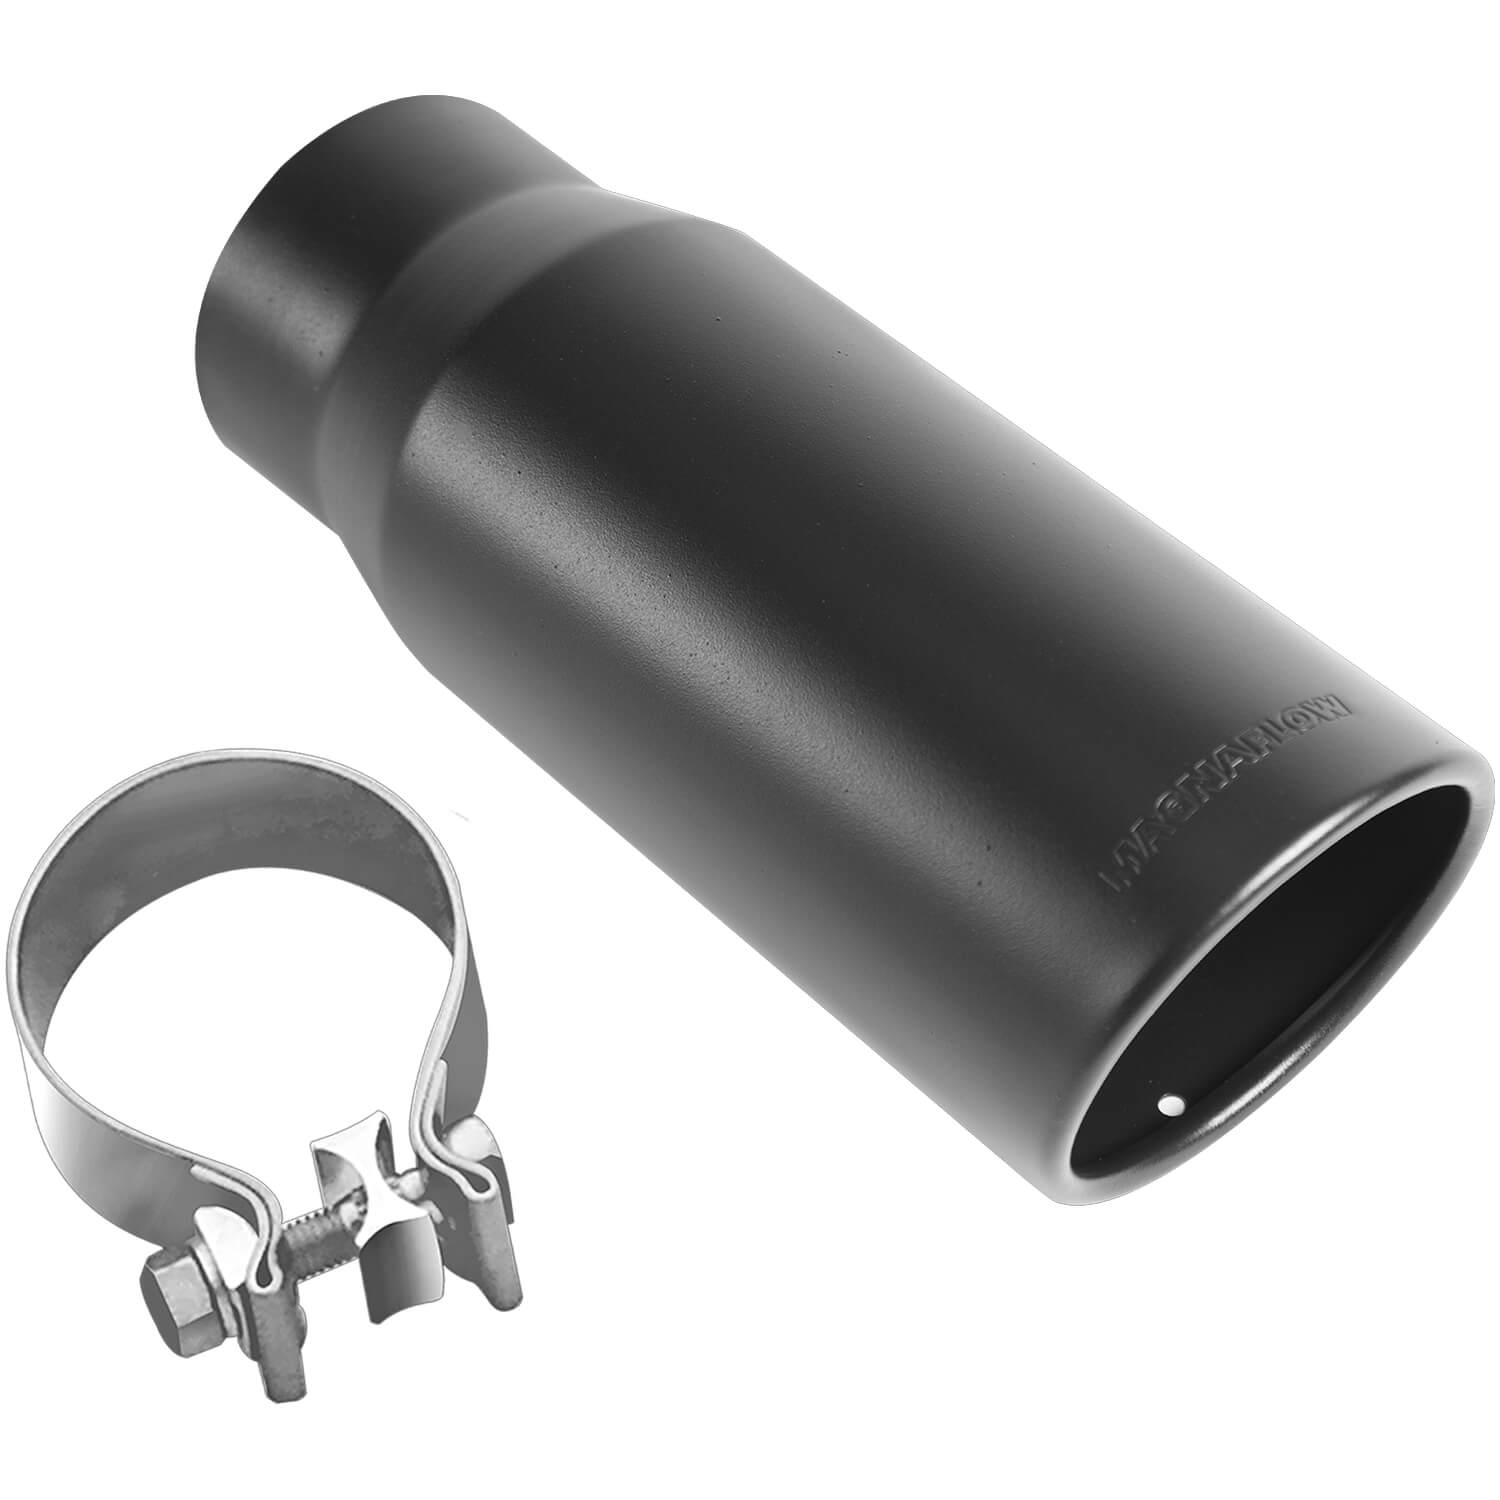 Polished Stainless Steel Clamp-On Single Exhaust Tip Inlet Inside Diameter: 4"